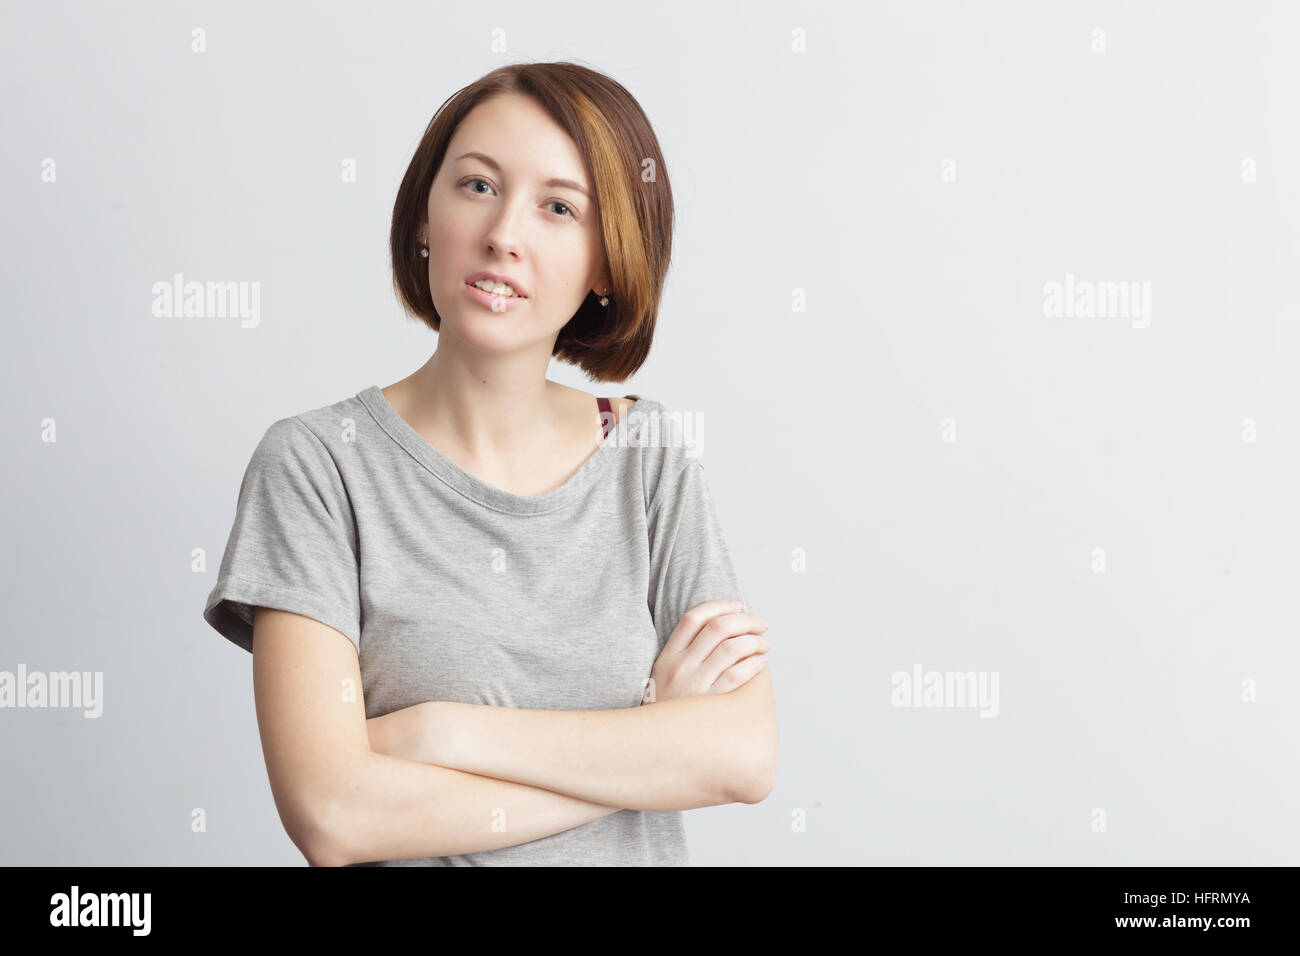 Girl with incomprehension and indignation looks forward. Understand the strange situation Stock Photo